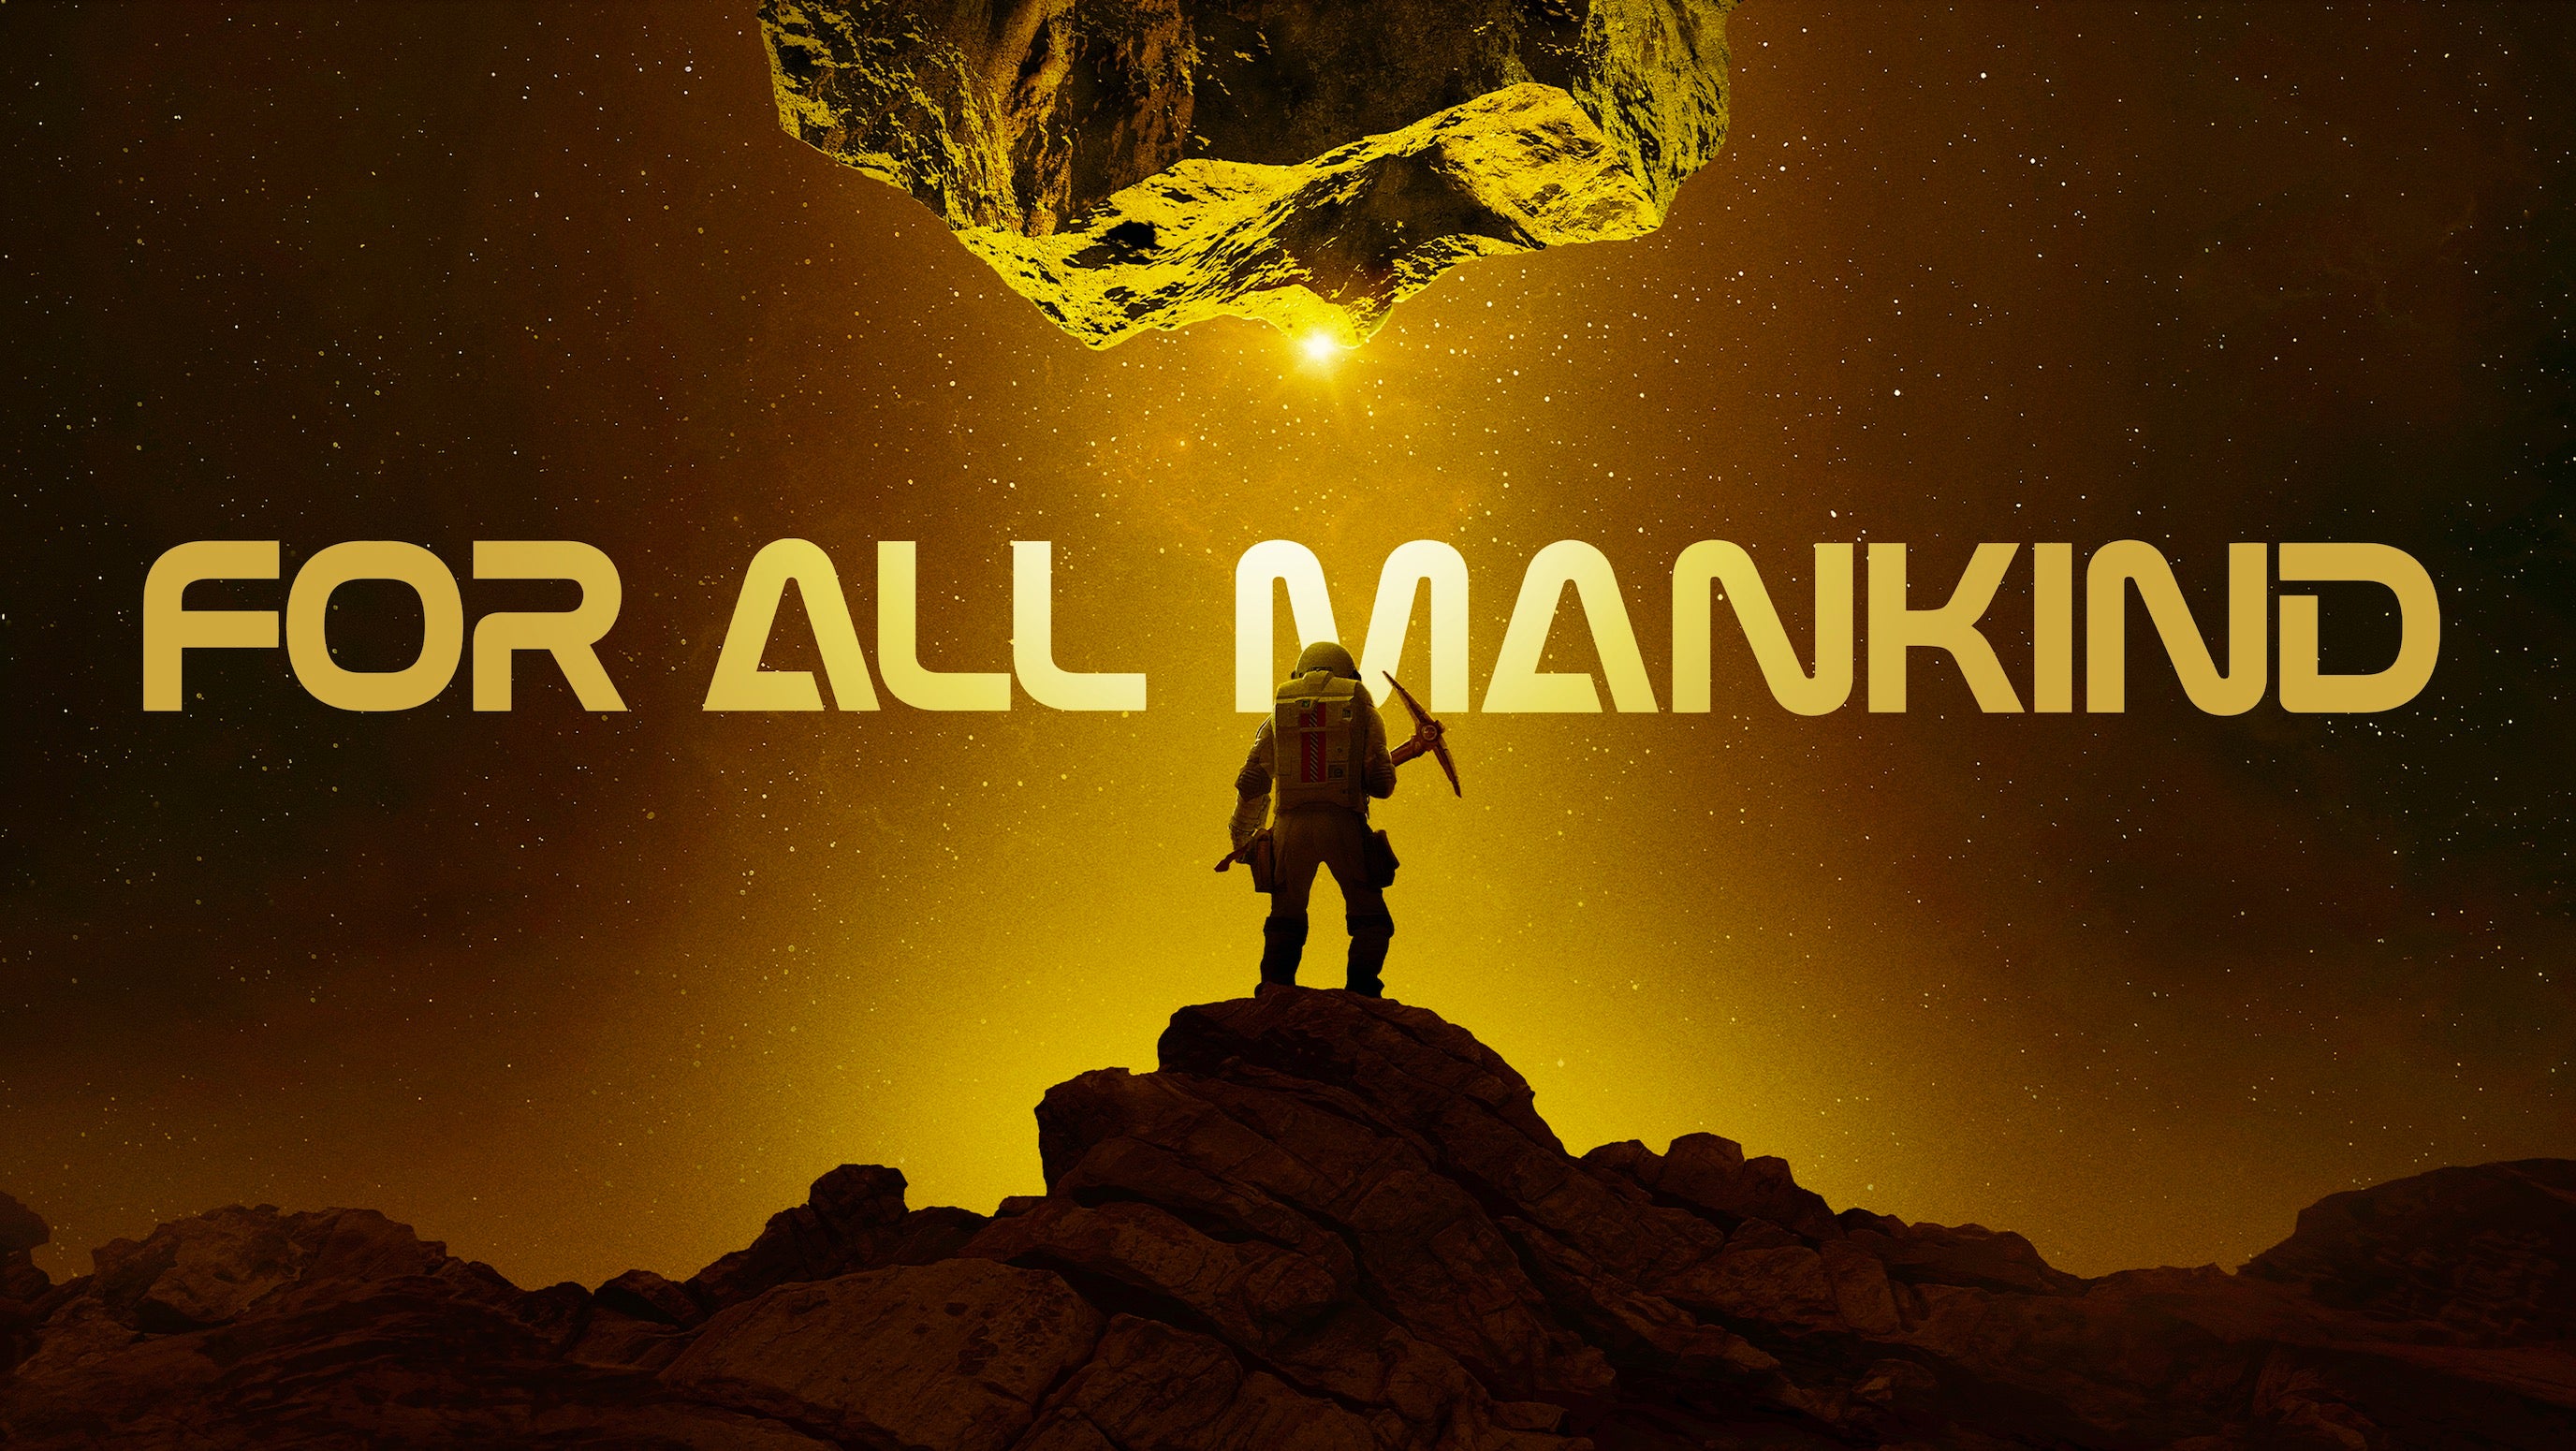 For All Mankind’s Season 4 Trailer Introduces a New Space Race thumbnail